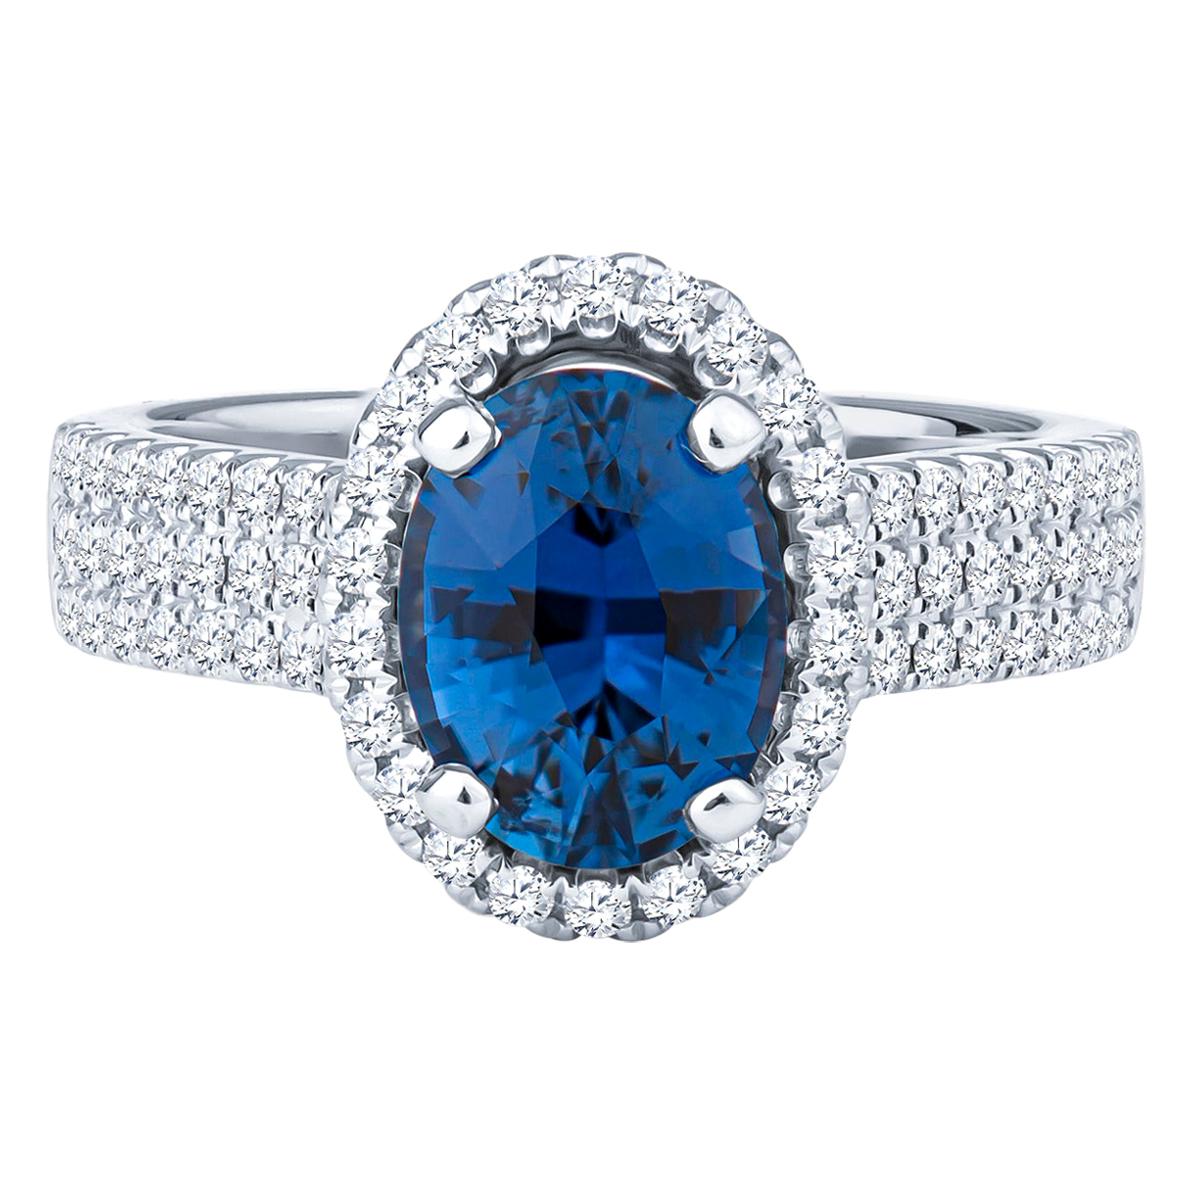 2.28 Carat Oval Blue Sapphire and Diamond Ring, GIA Certified